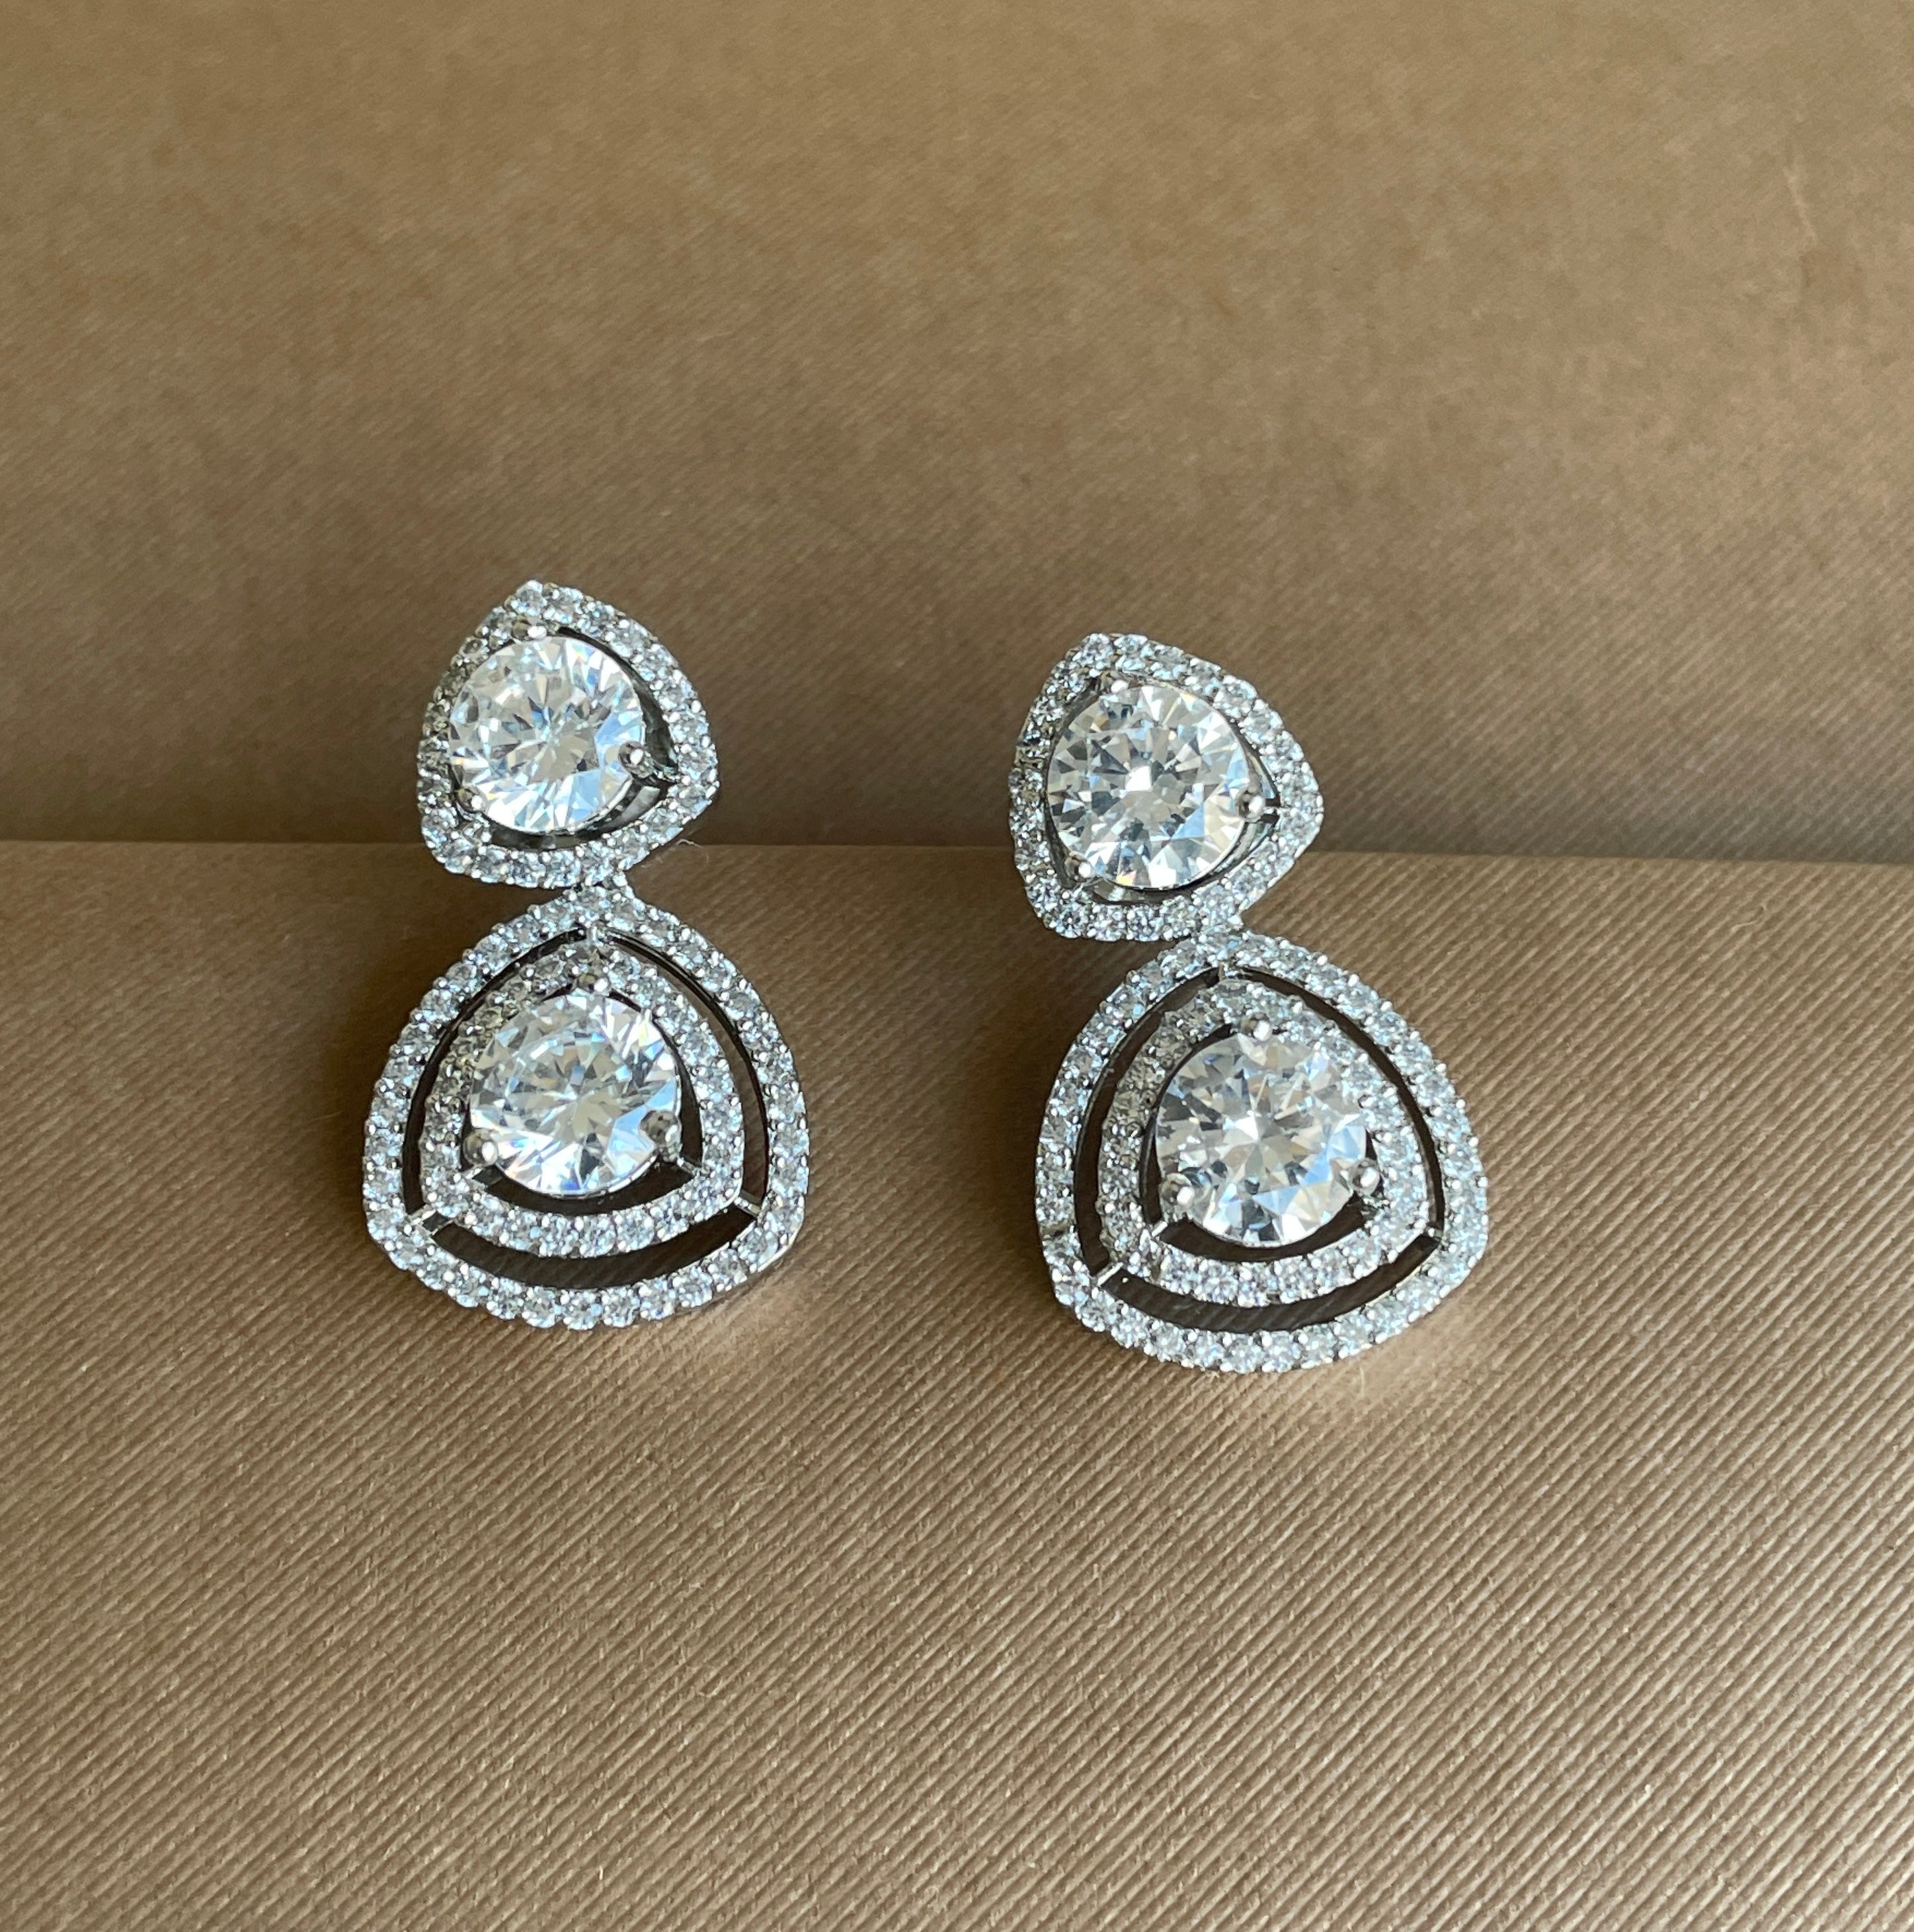 How To Choose The Best Diamond Earrings For Your Face Type